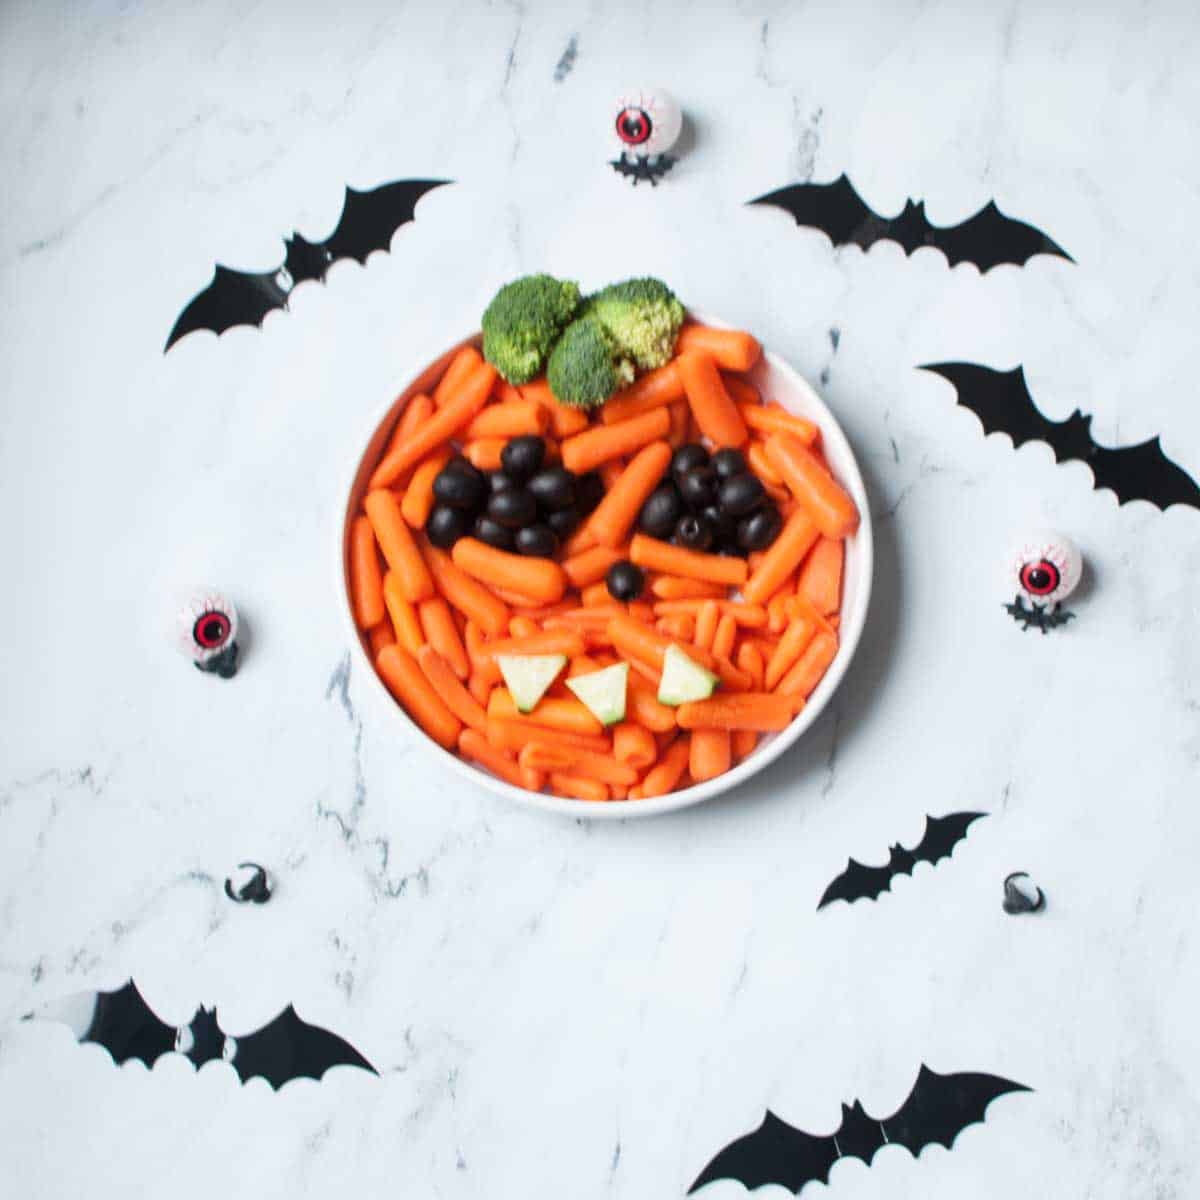 A halloween veggie tray. There are carrots in a dish with olives, broccoli, and cucumbers. They are arranged in a way that makes it look like a jack-o-latern. There are bat and eyeball Halloween decorations surrounding it.